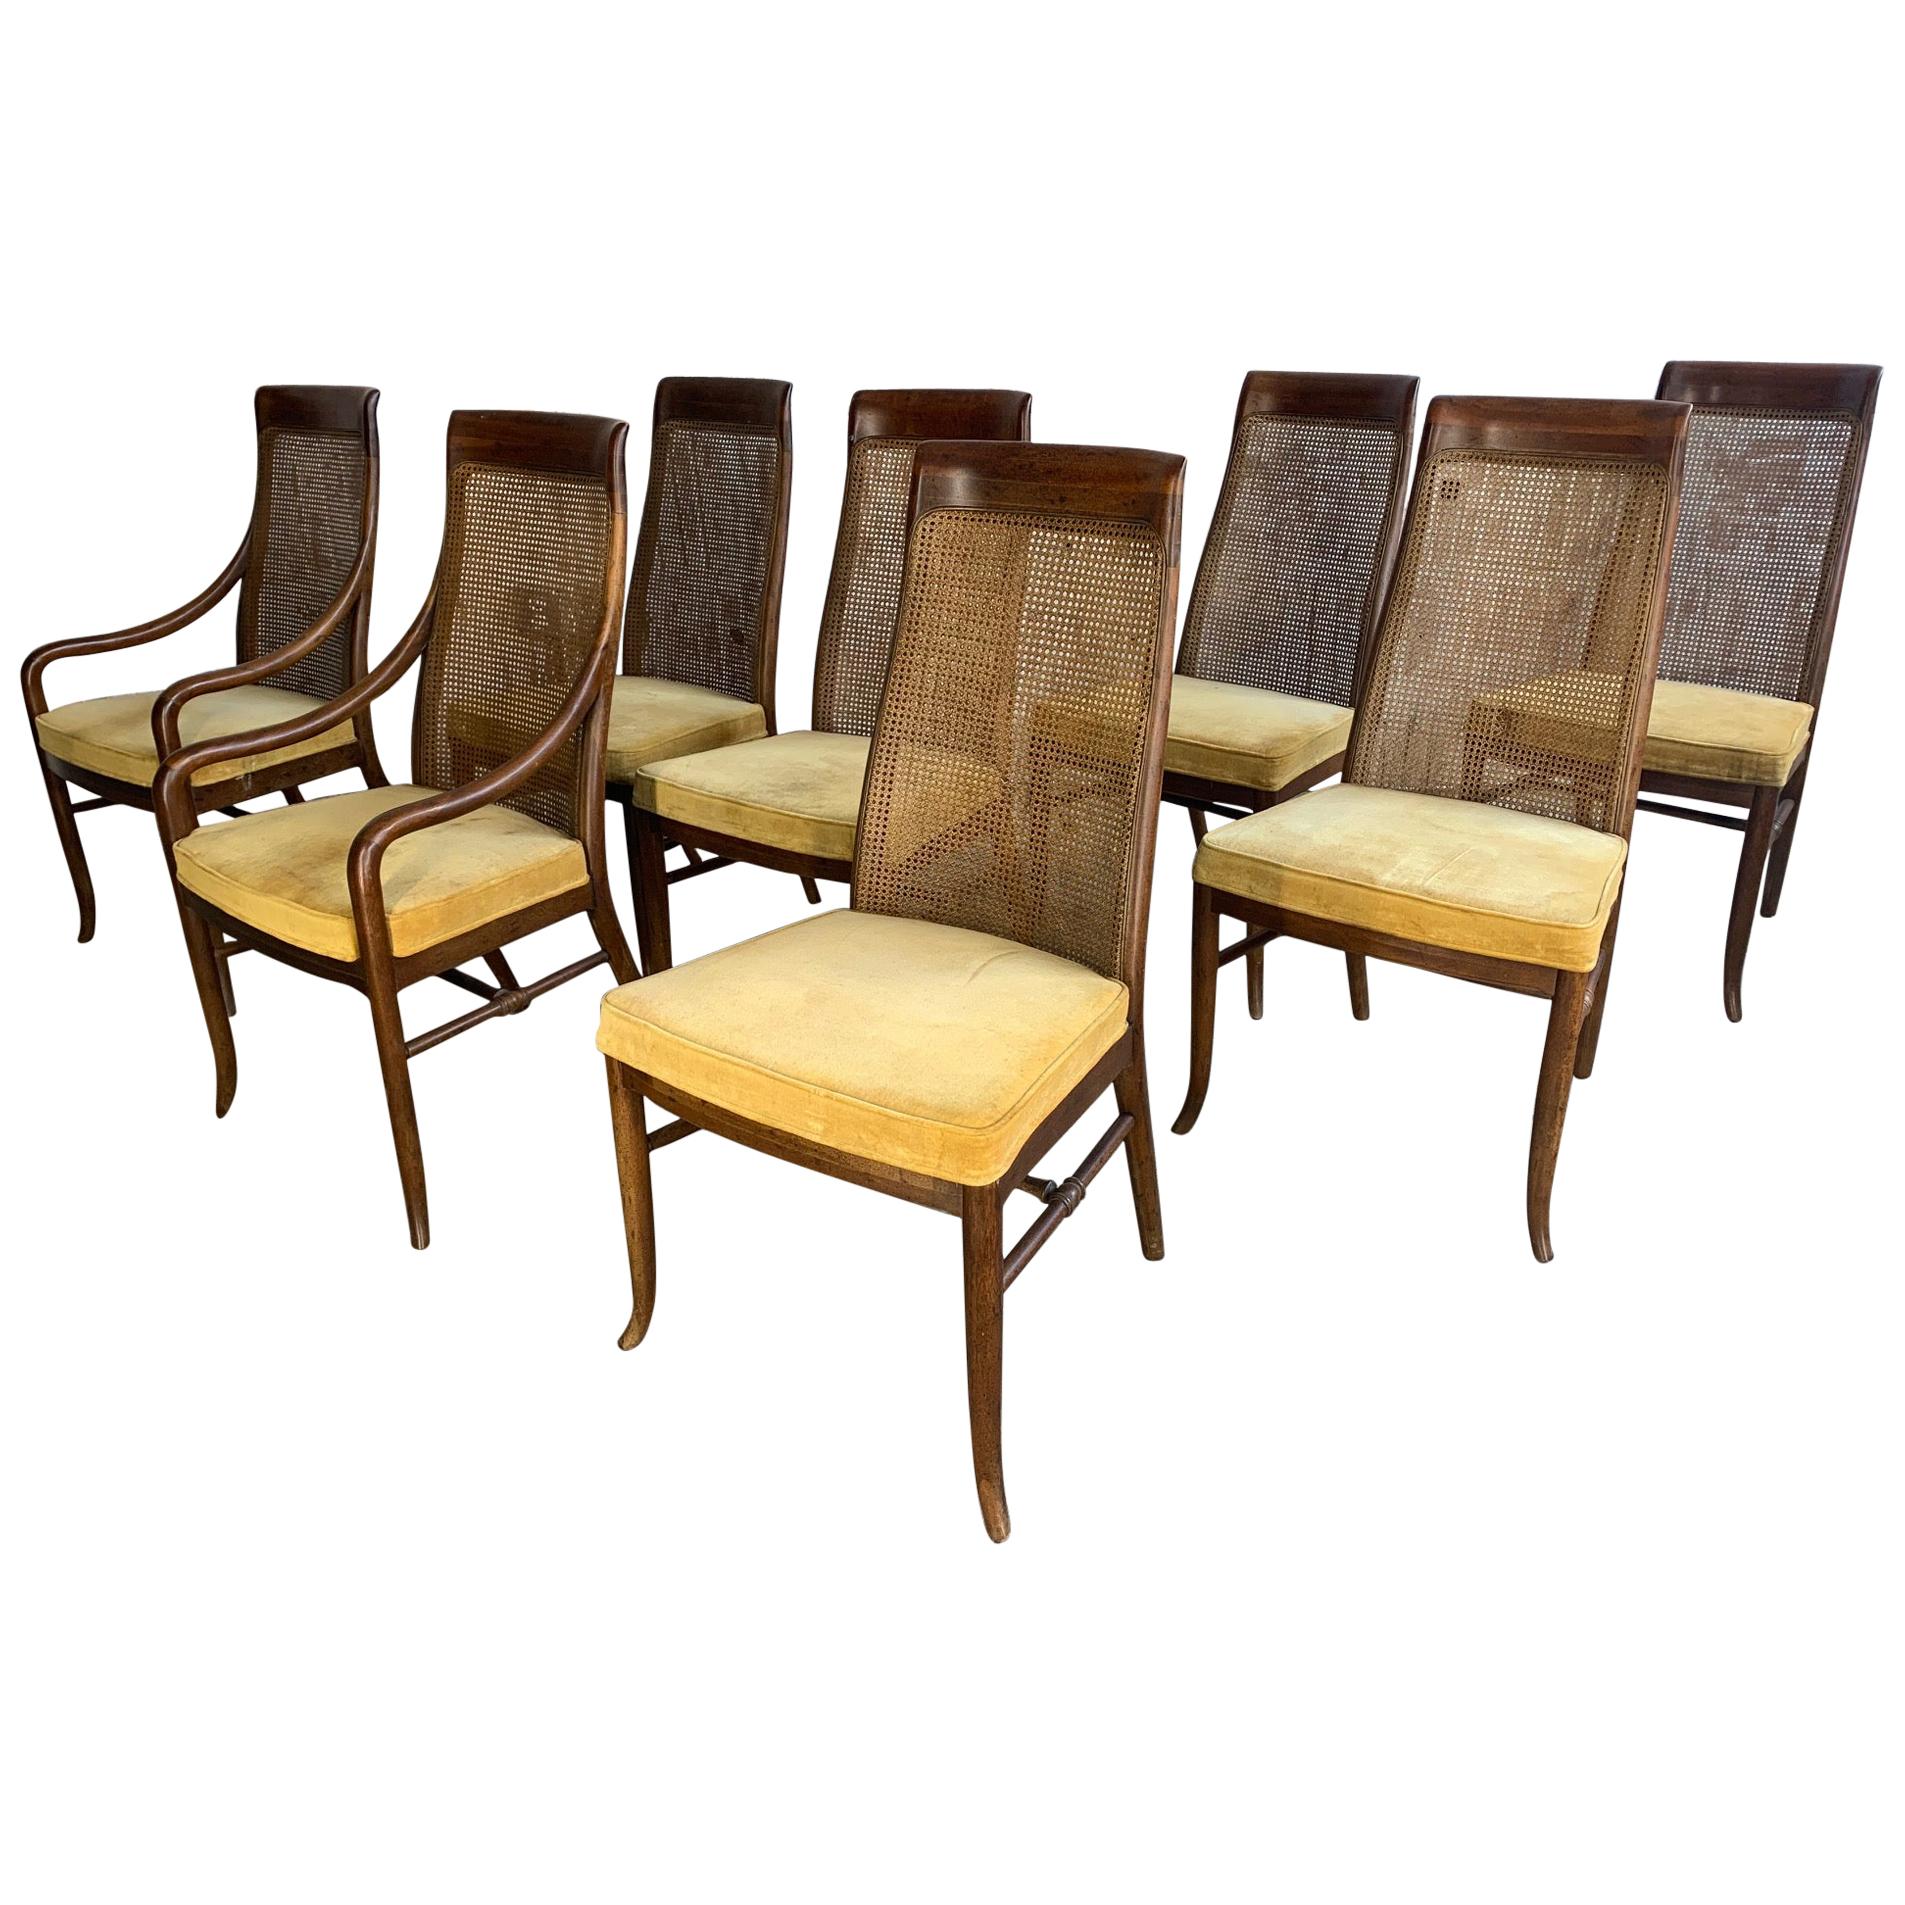 Midcentury High Back Cane Dining Chairs By Drexel At 1stdibs